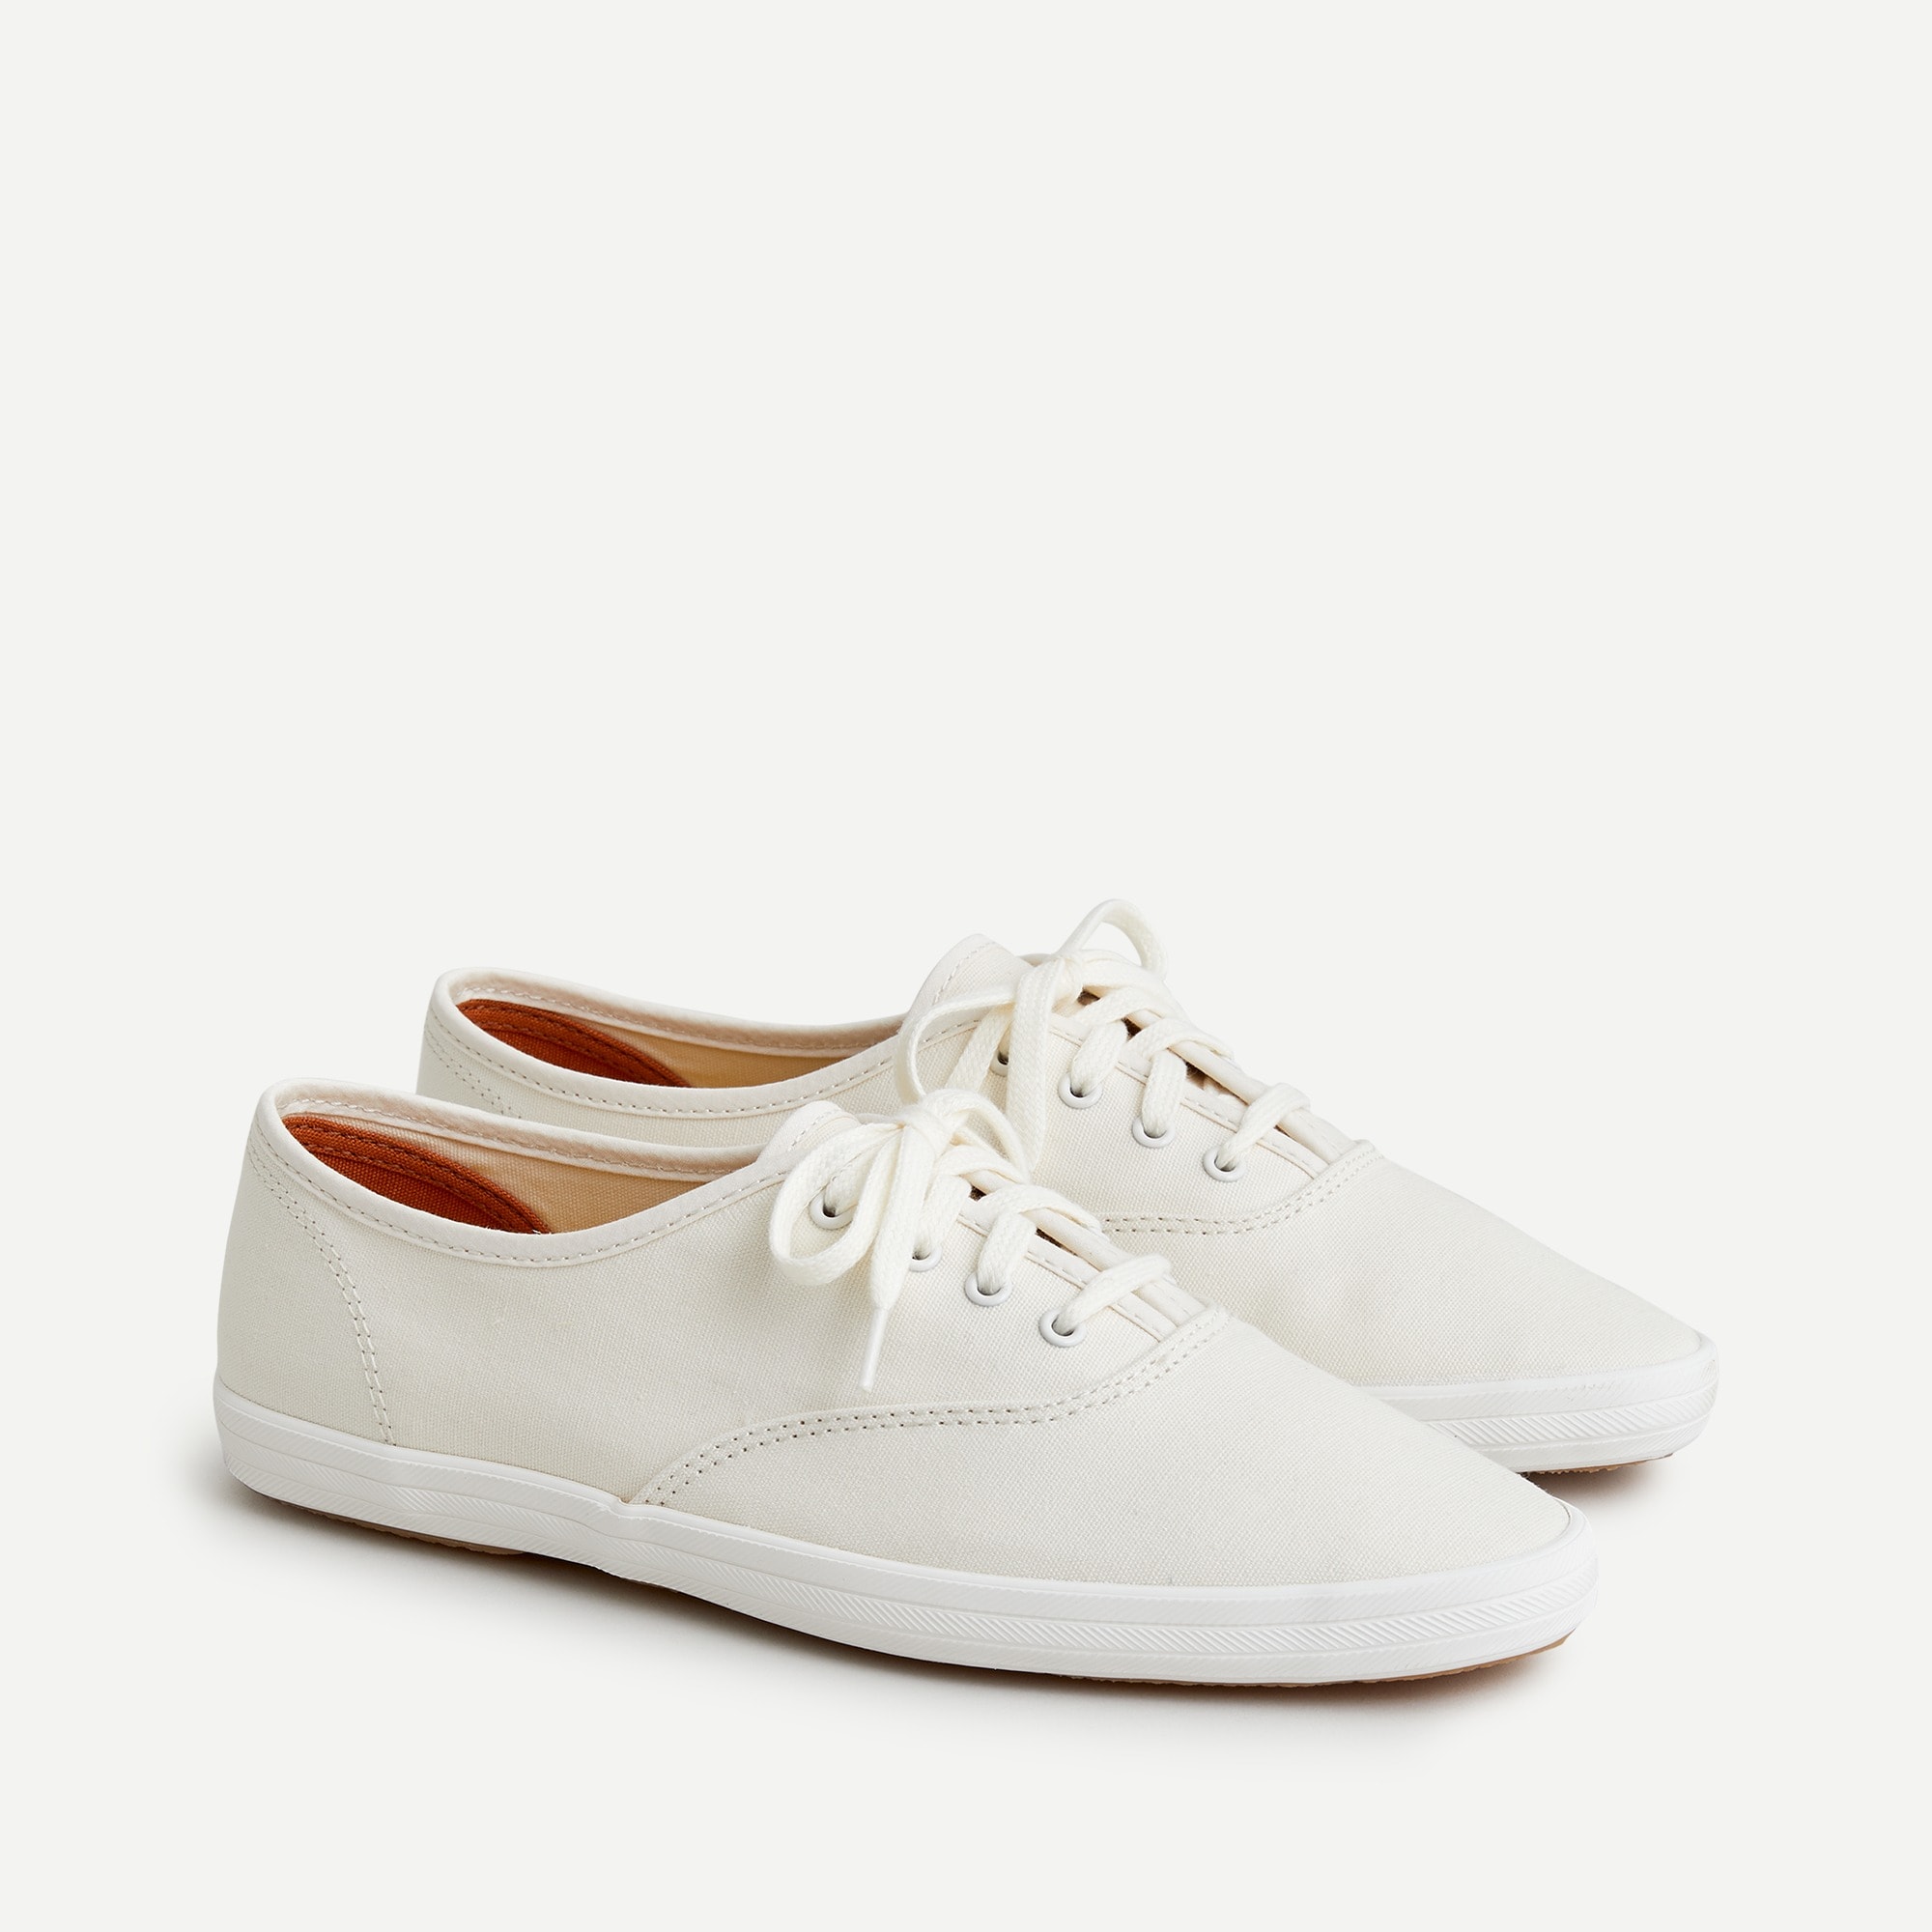 keds champion sneakers